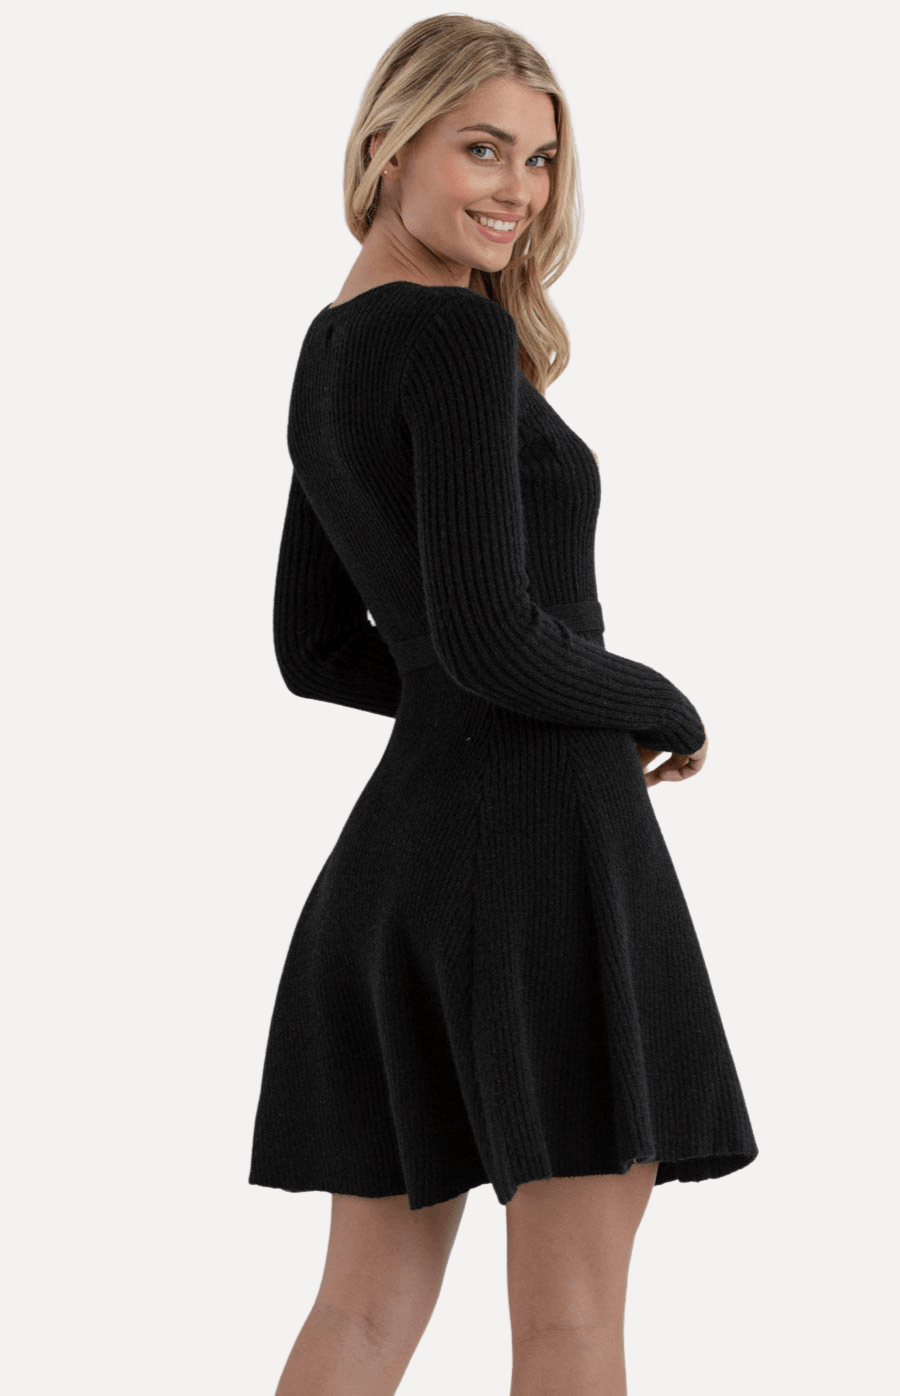 Carter Knitted Dress in Black - Ophelia Fox Boutique